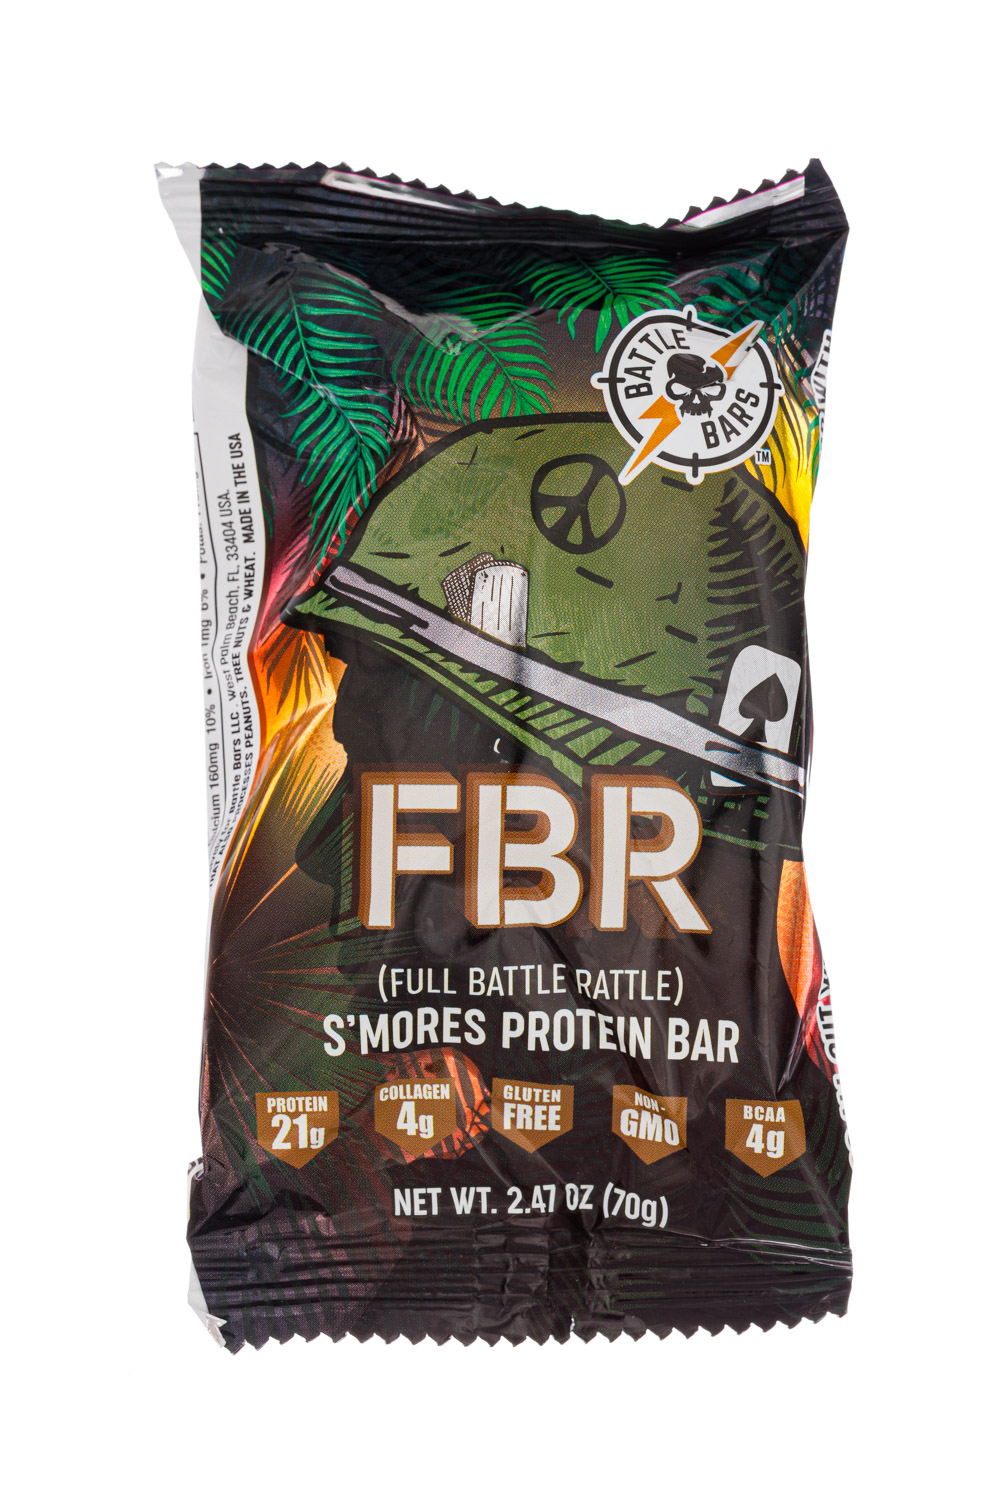 FBR: S'mores Protein Bar